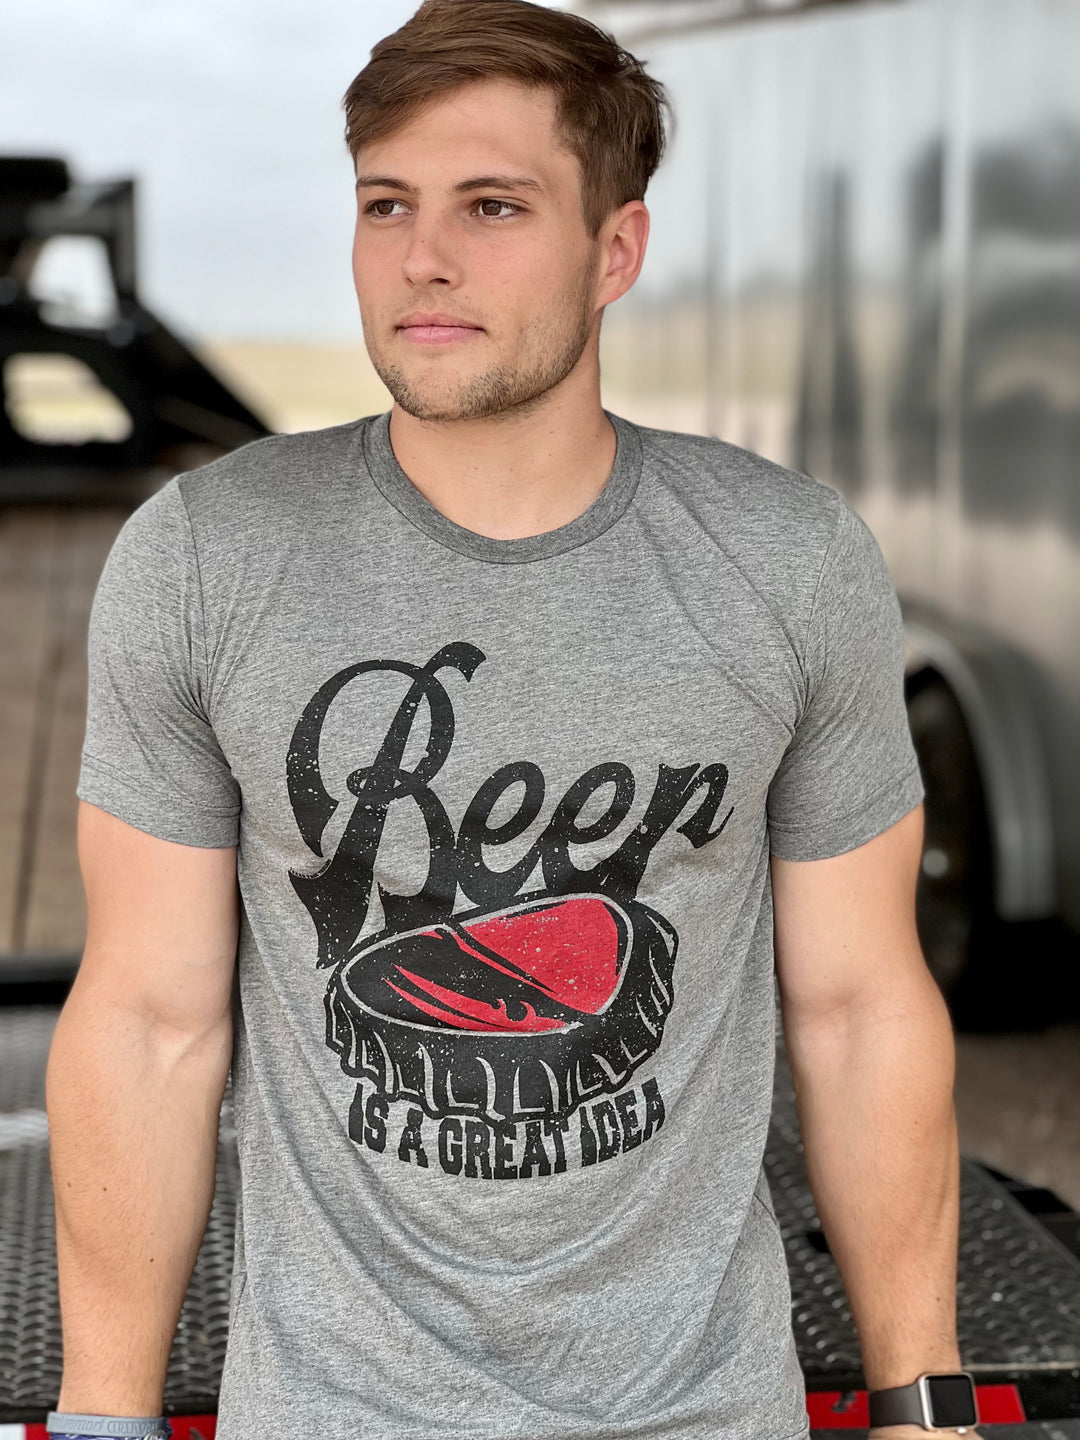 Beer is a Great Idea Graphic Tee by Texas True Threads